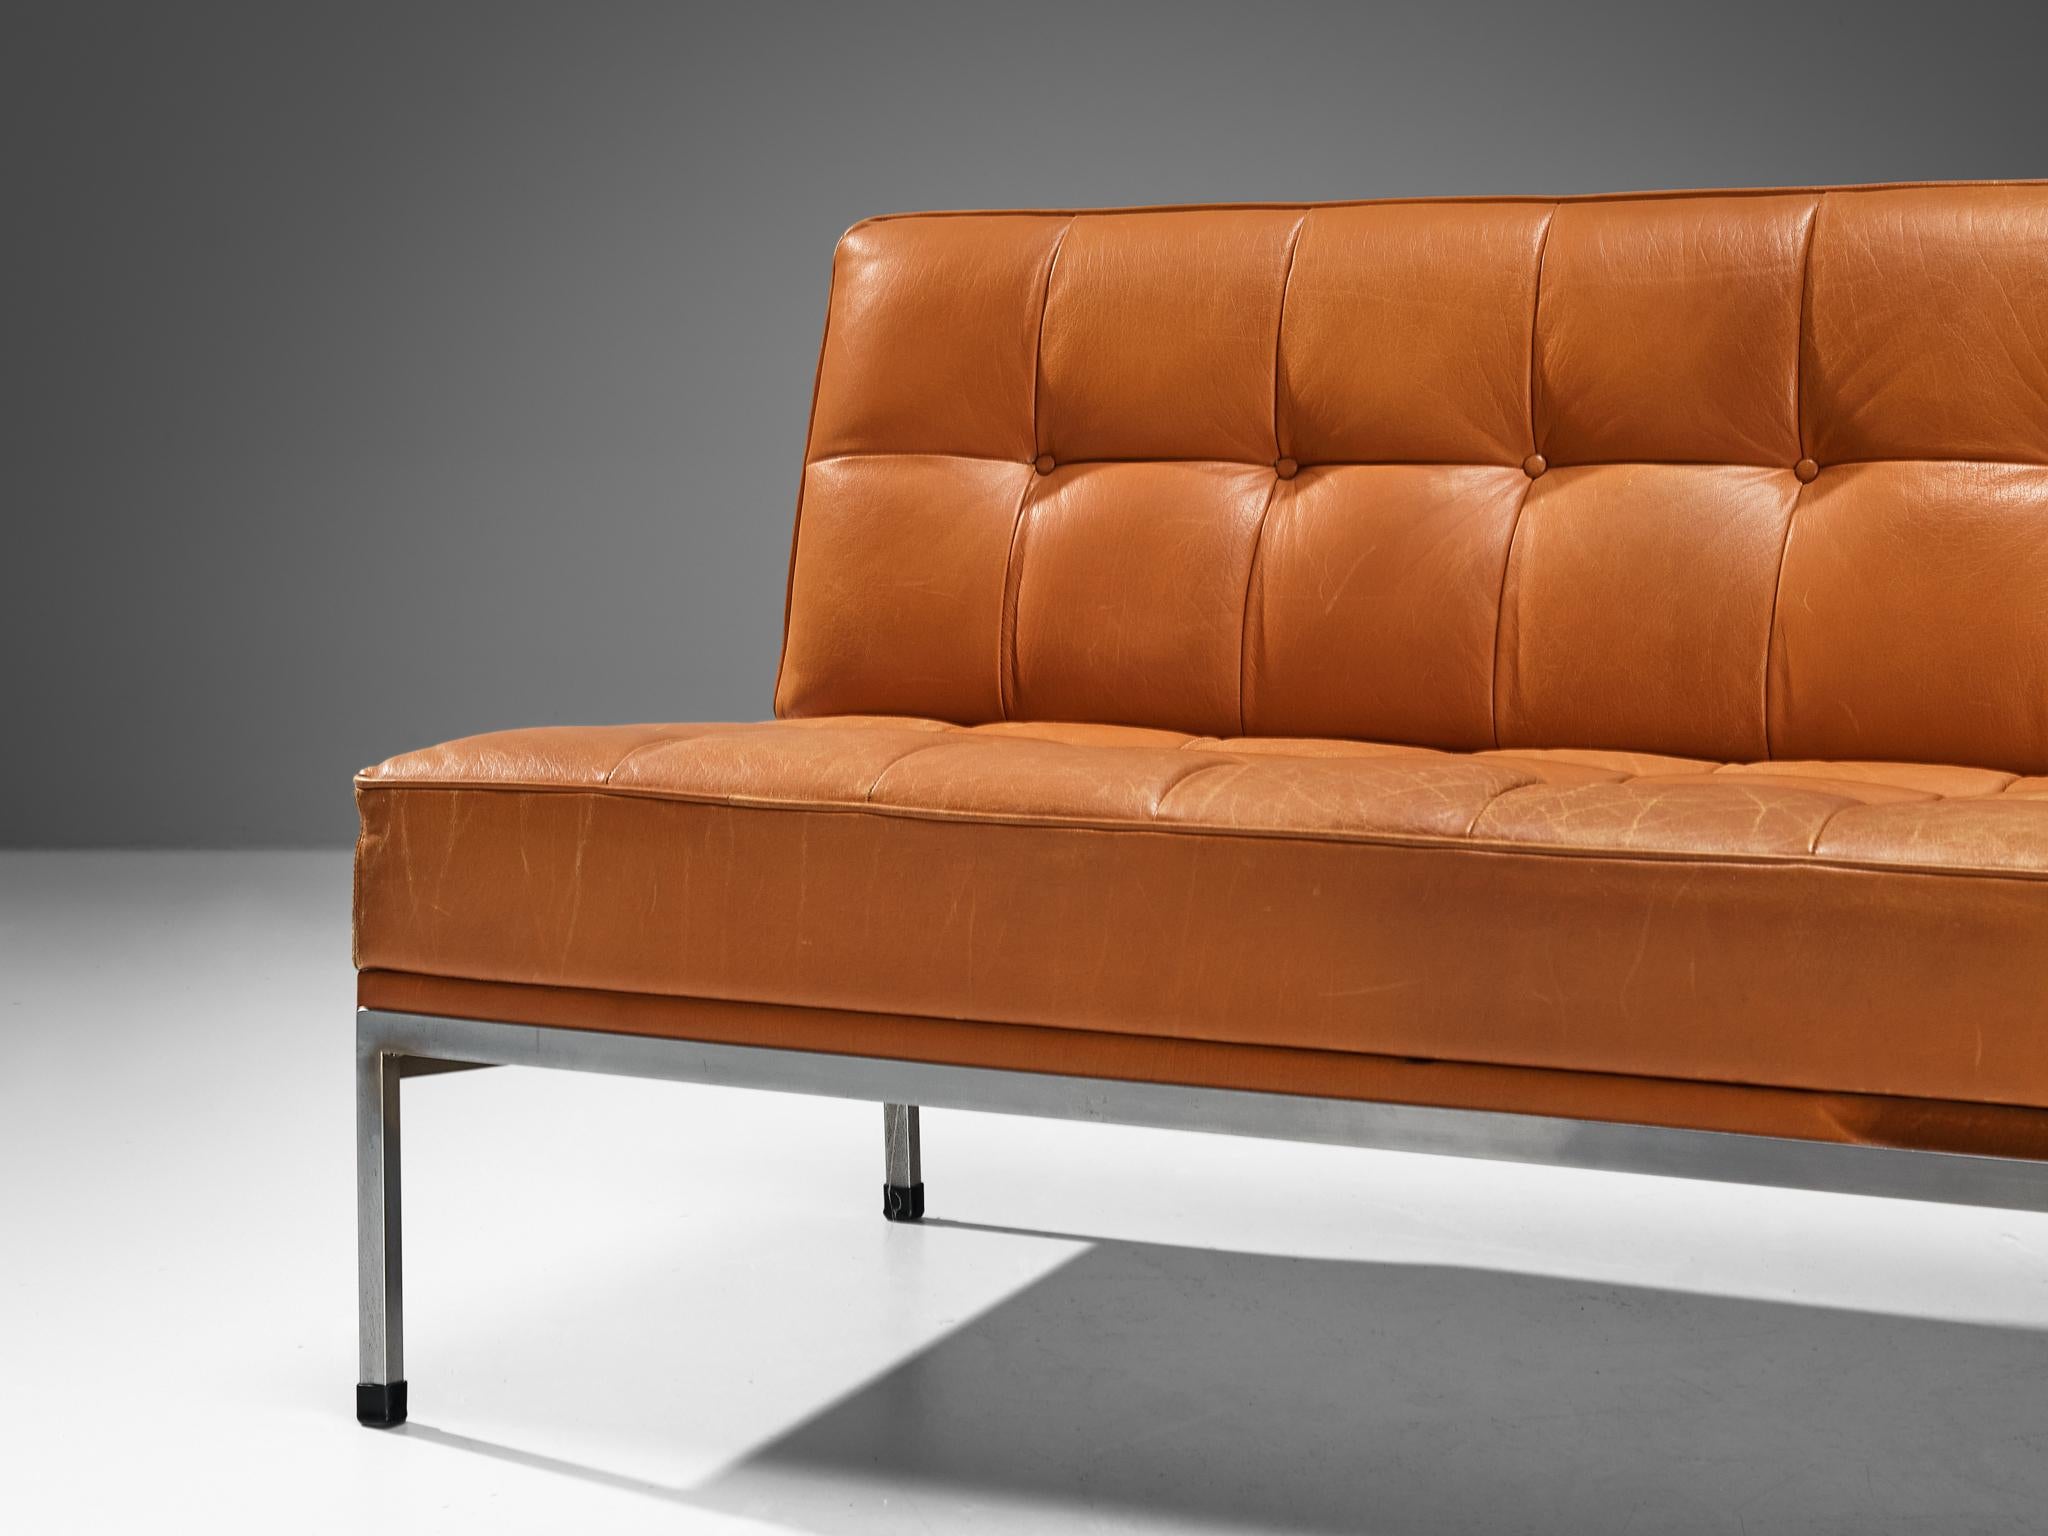 Johannes Spalt 'Constanza' Sofa Daybed in Cognac Leather  In Good Condition For Sale In Waalwijk, NL